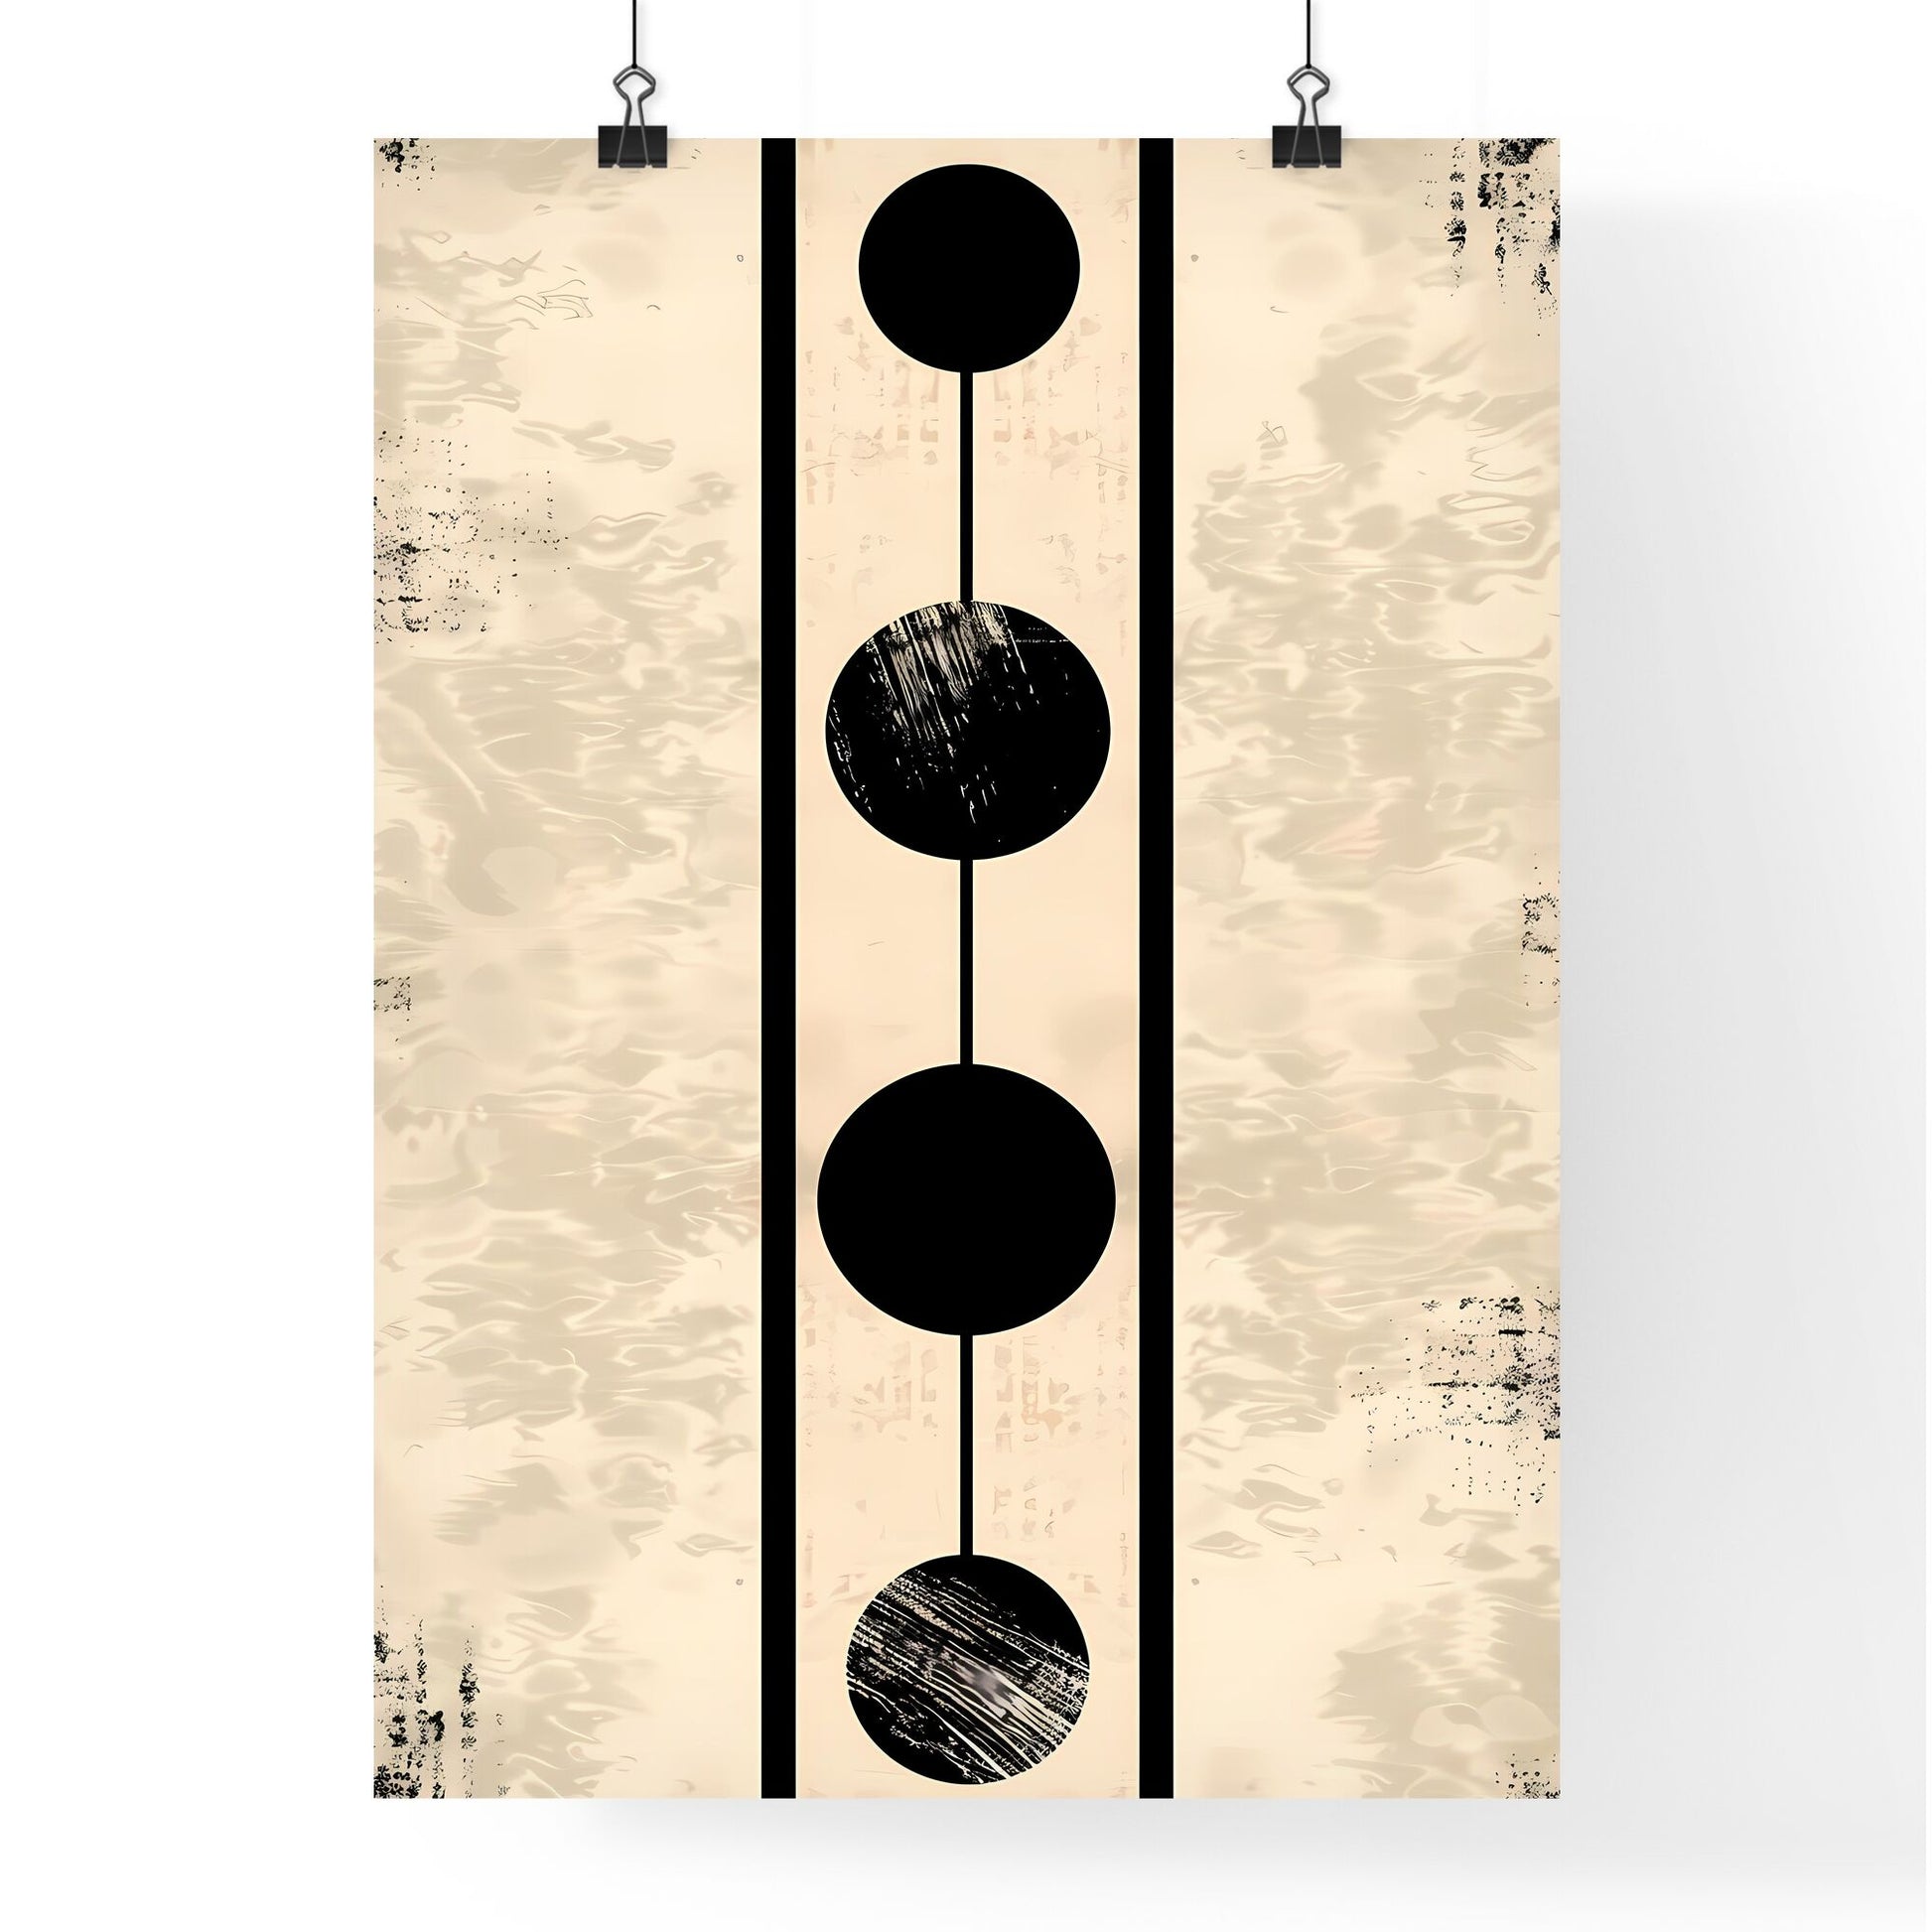 Bauhaus-Inspired Abstract Art: Minimalistic Logo Design of Four Circles and Vertical Line on Parchment Background, Black and Tan, Digital Collage, Stencil, Flat Color Shading, Graphical Bauhaus Style Default Title